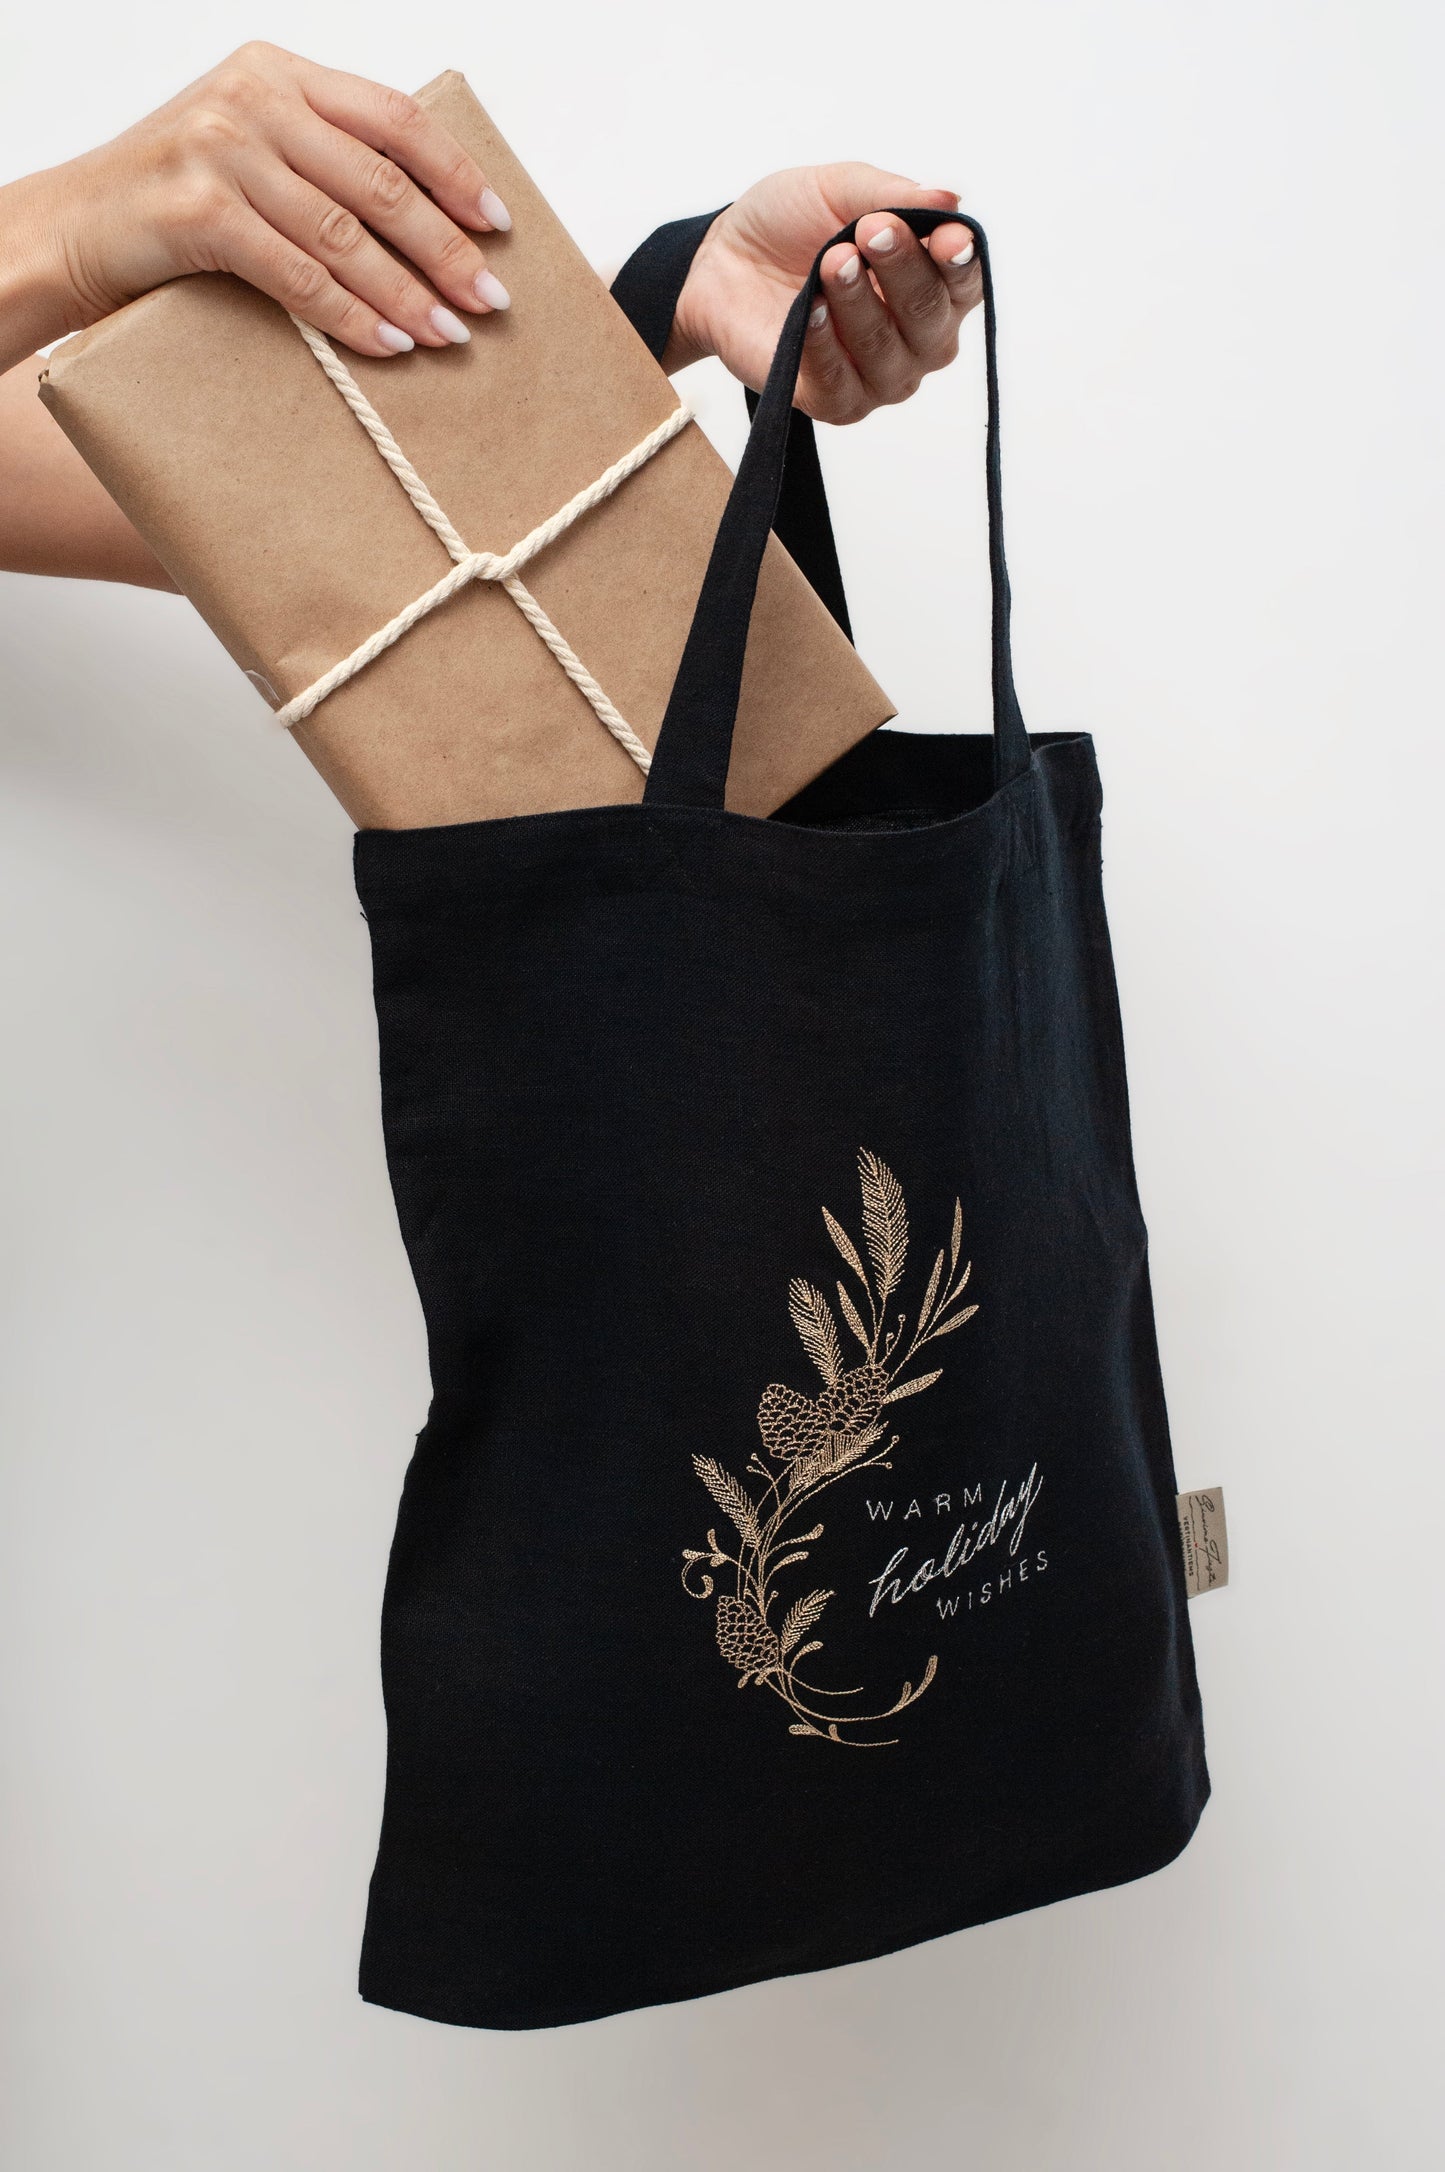 Glistening Christmas Tree: Embroidered Linen Tote Bag for the Holidays